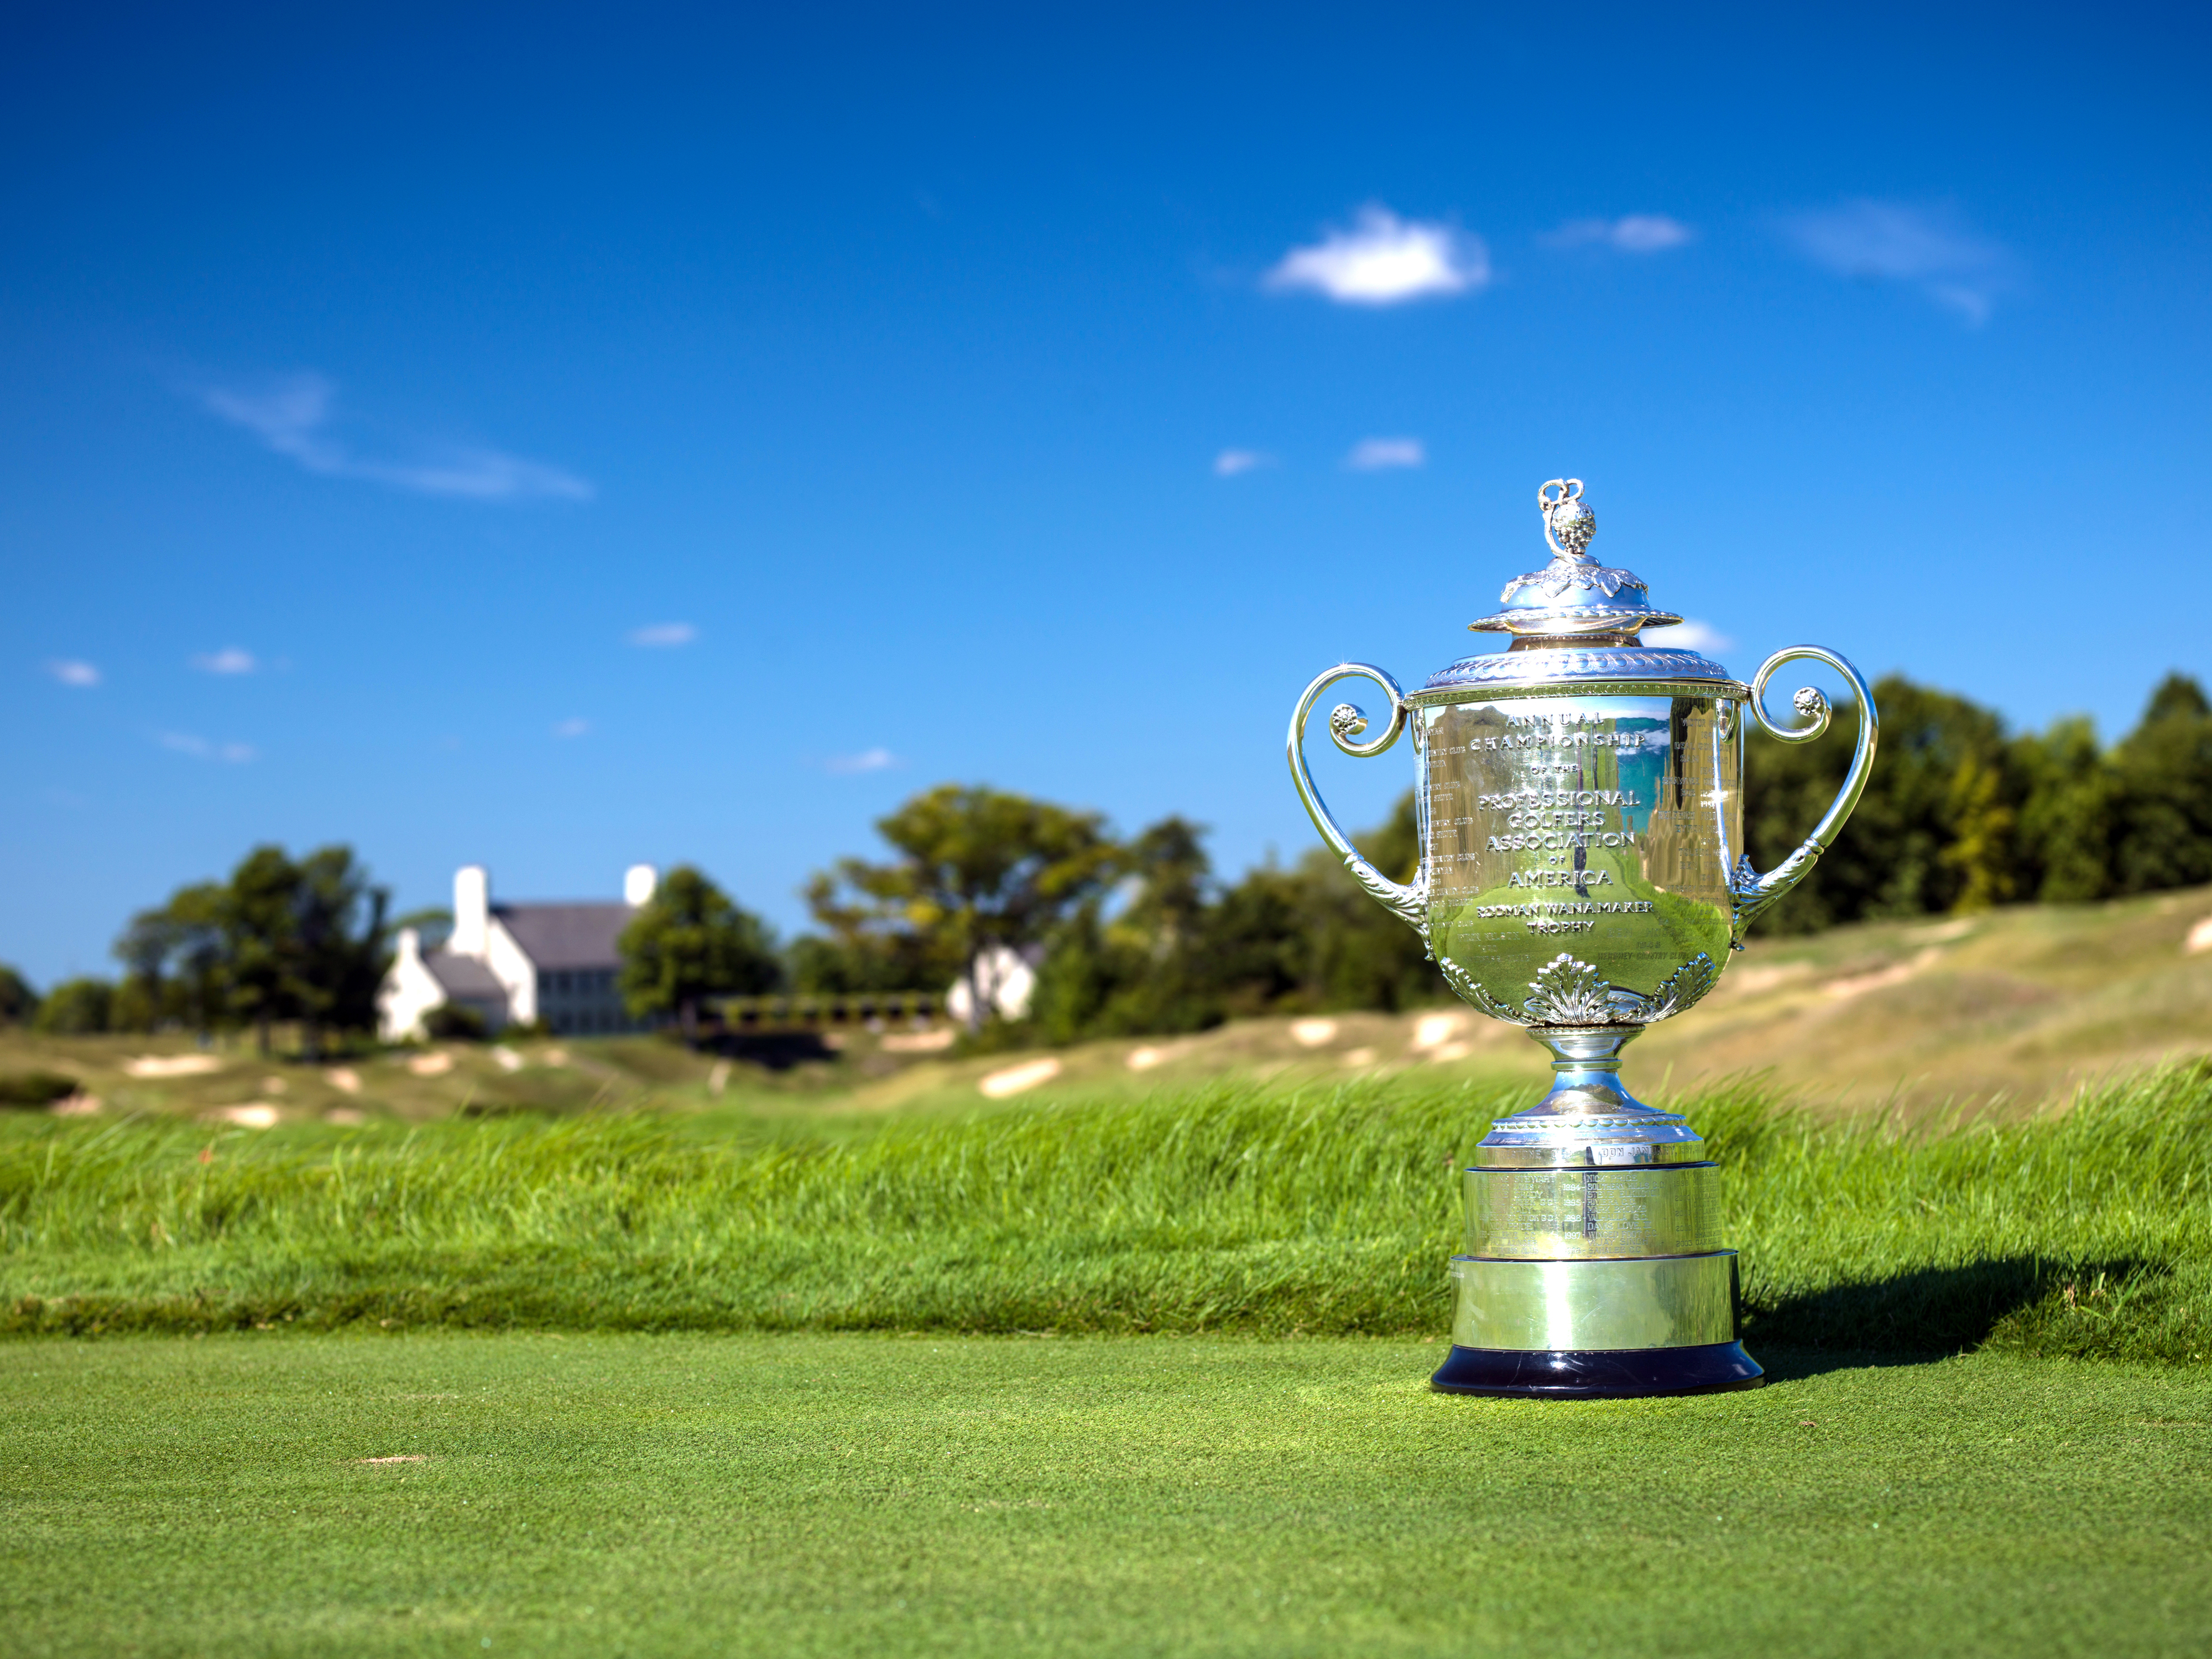 PGA of America re-ups with CBS for coverage of PGA Championship, signs on with ESPN in new 11-year deal Golf News and Tour Information Golf Digest